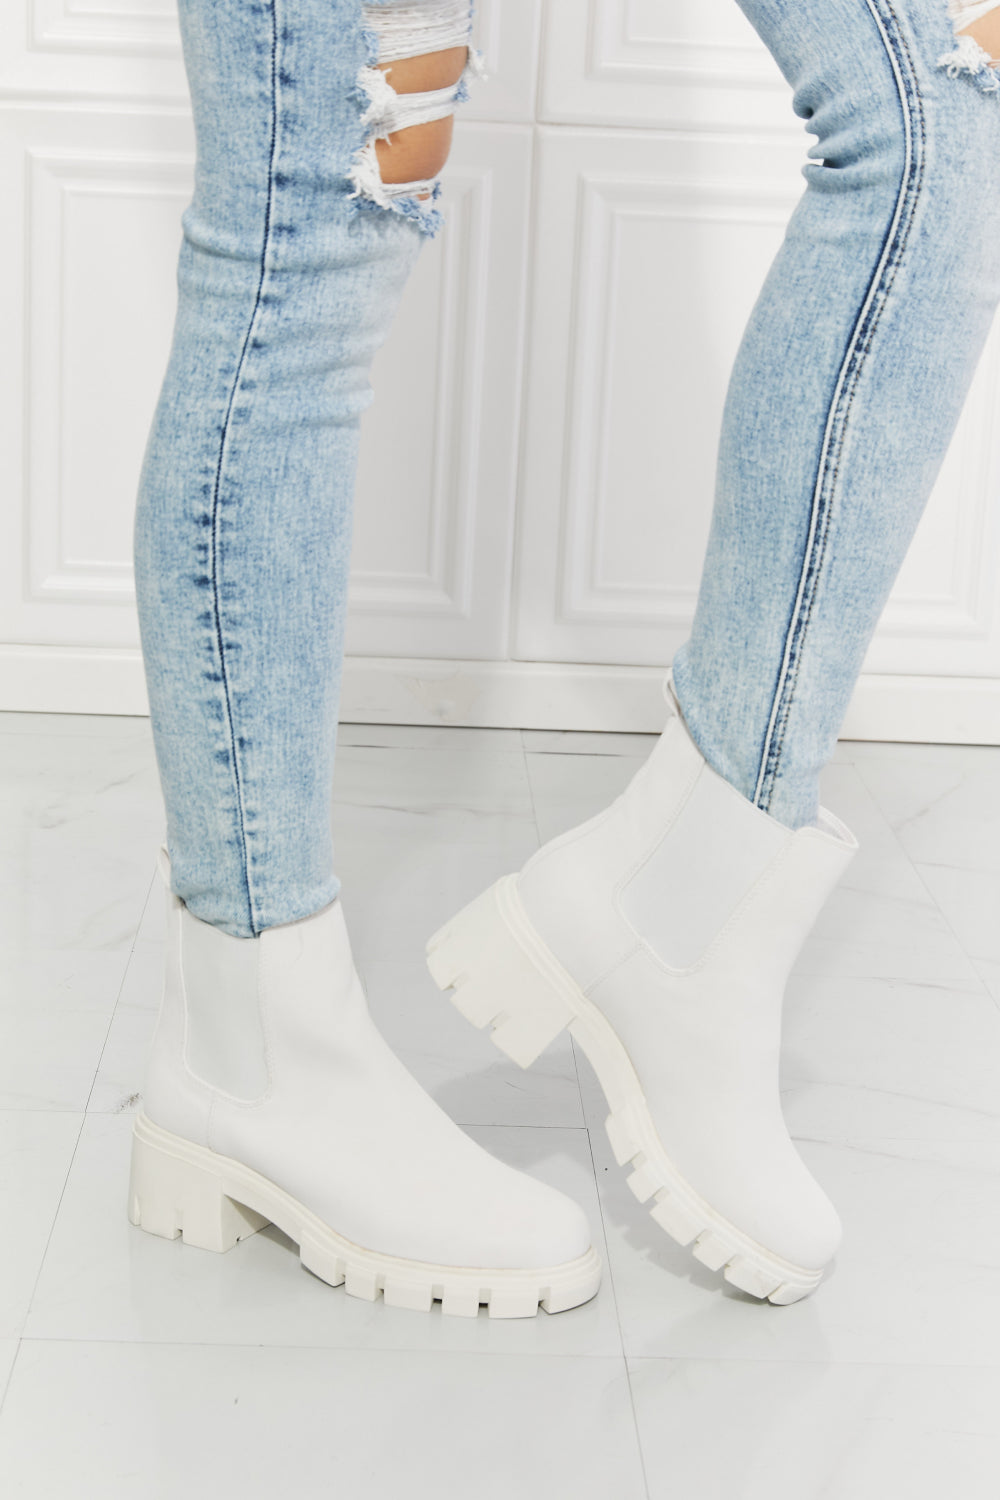 Matte Lug Sole Chelsea Boots in White | Tigbul's Variety Fashion